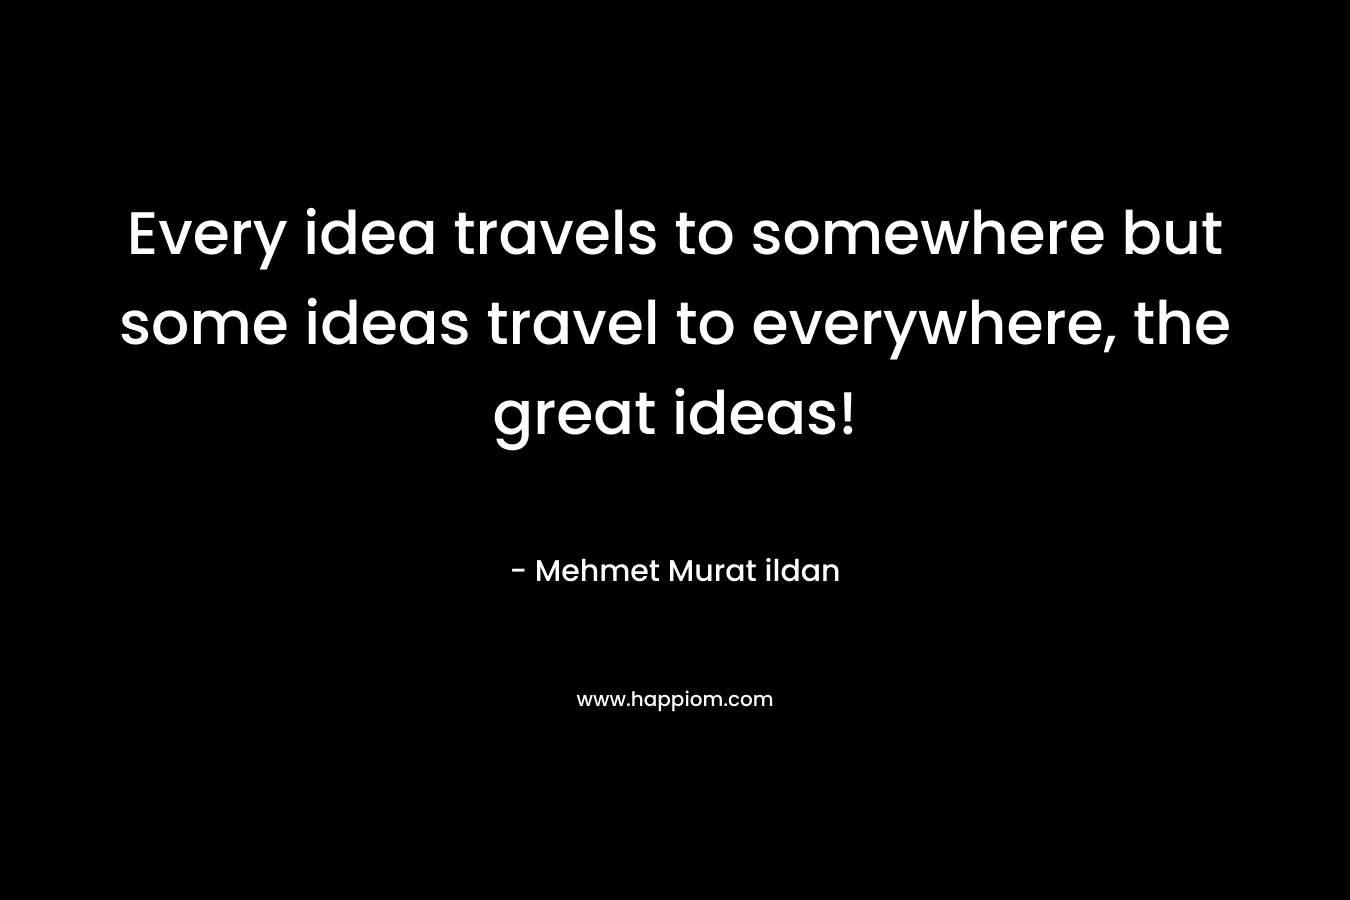 Every idea travels to somewhere but some ideas travel to everywhere, the great ideas!